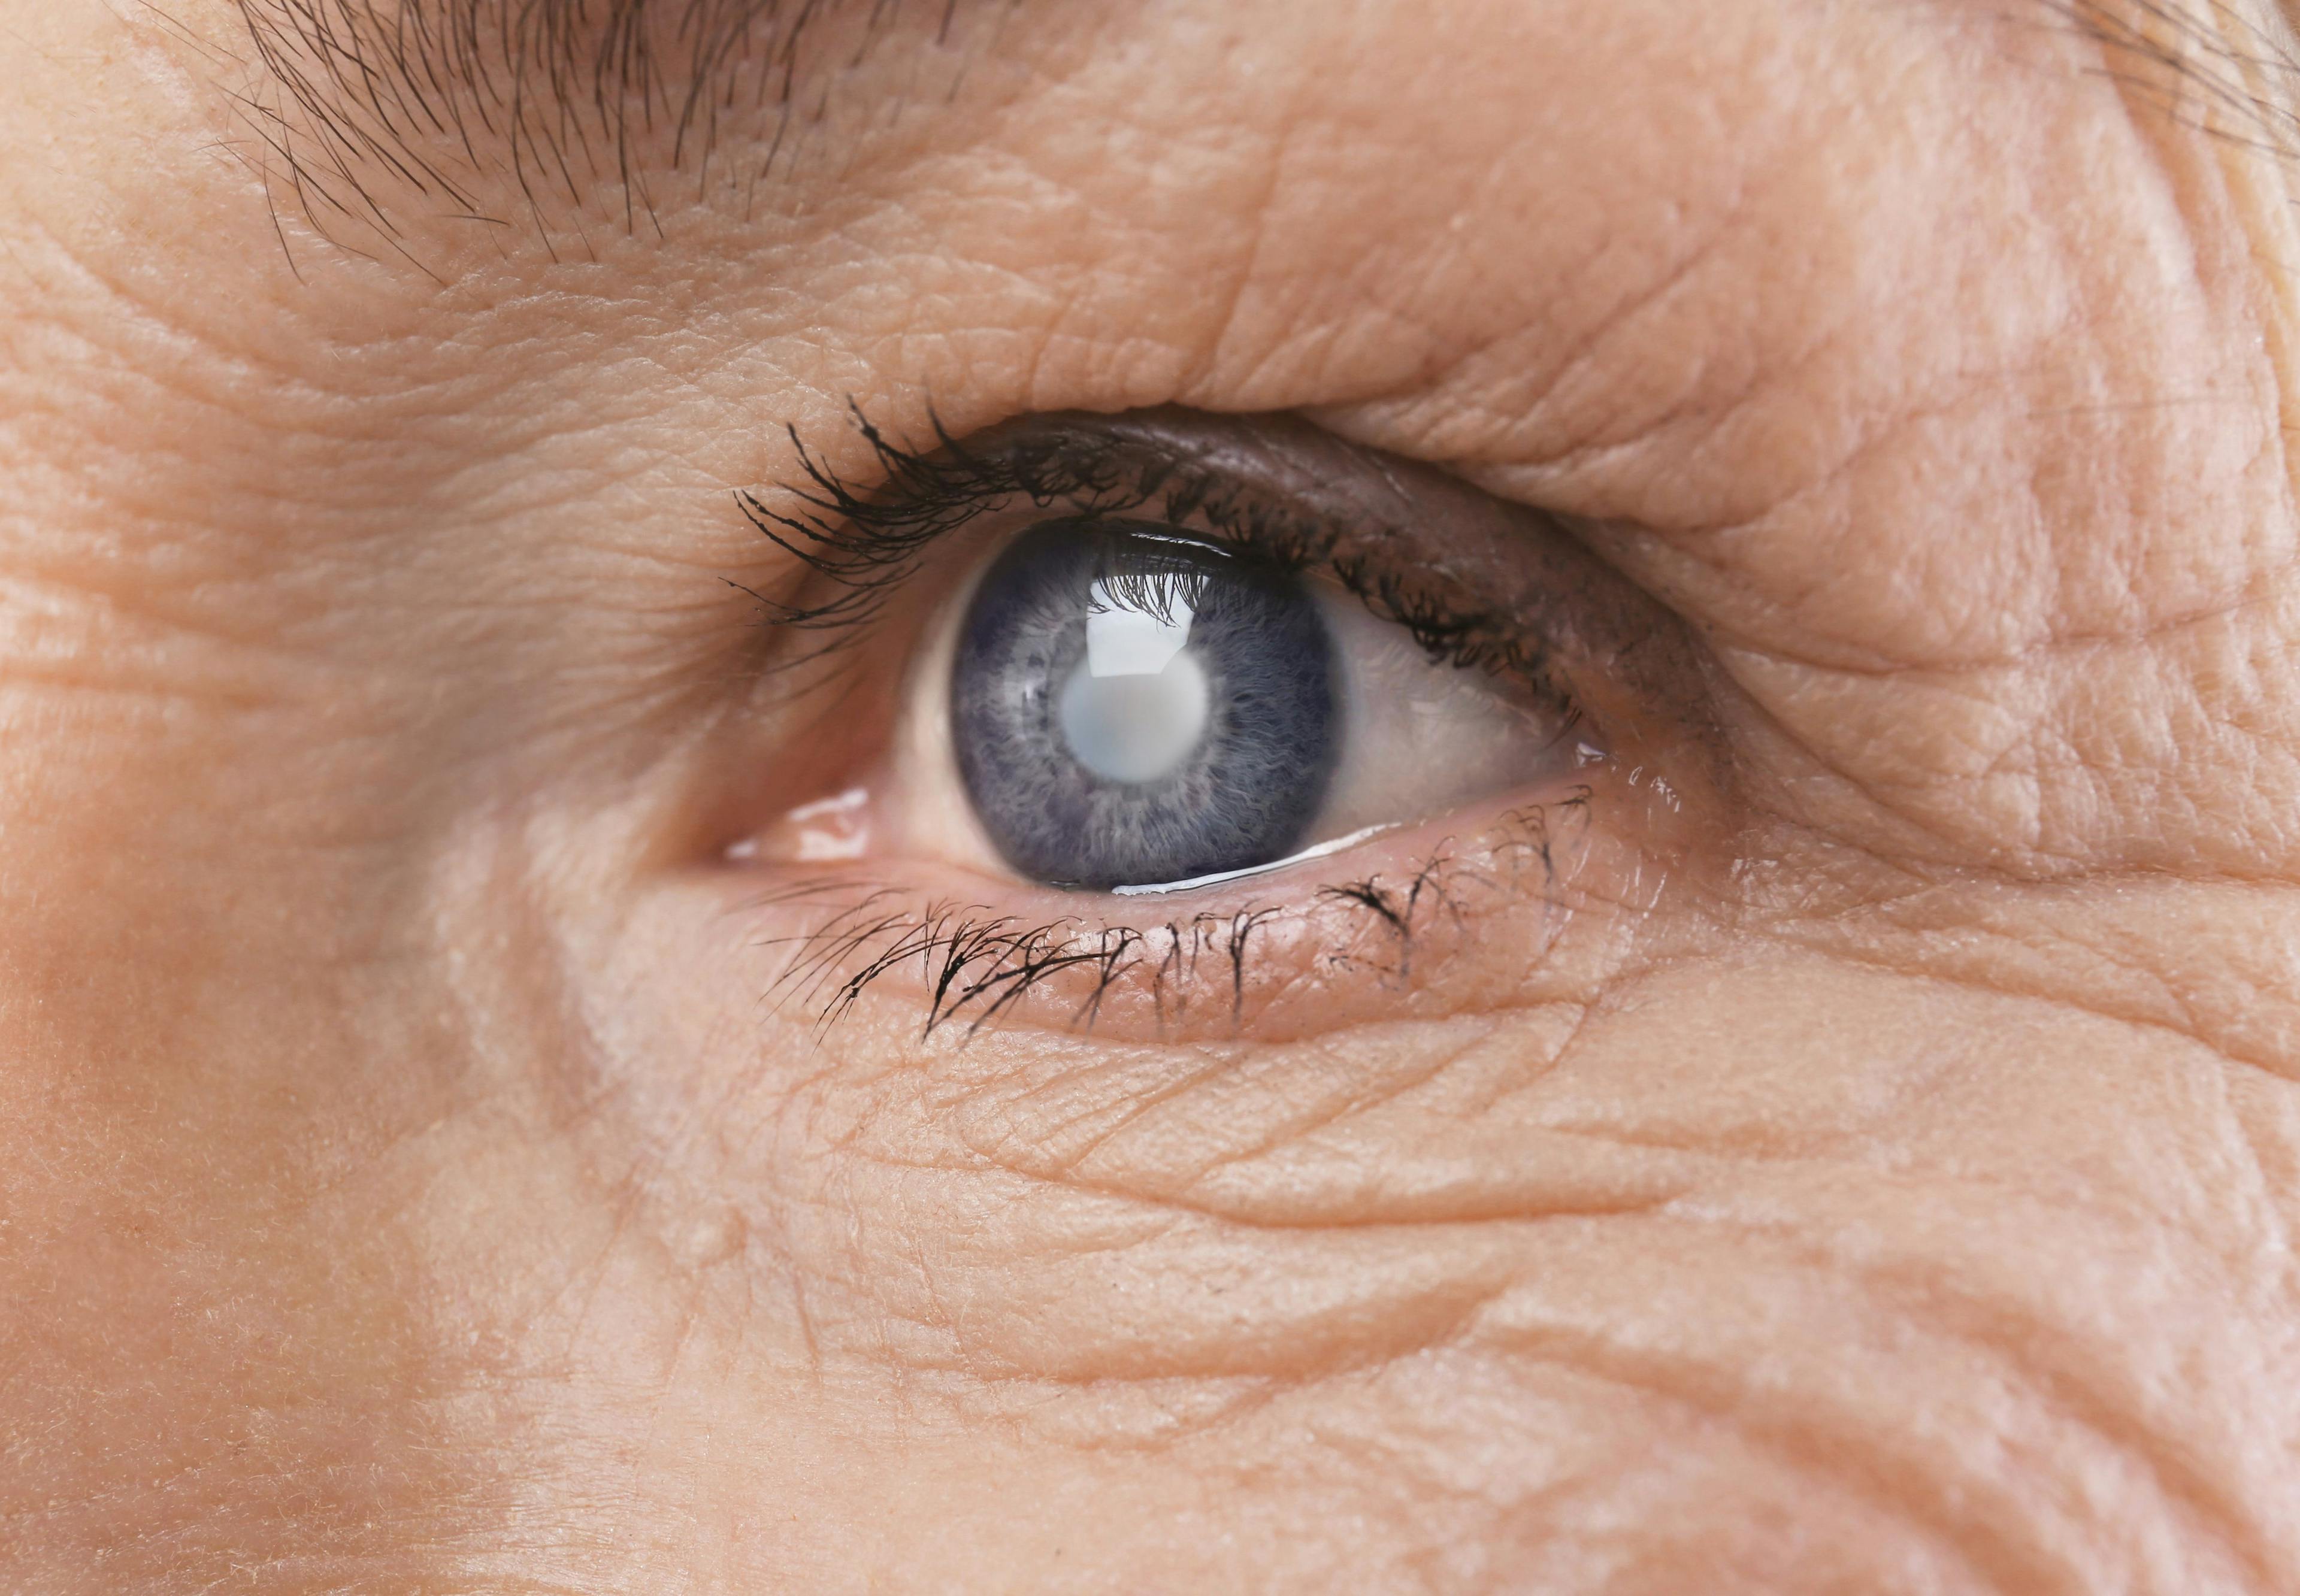 Cholesterol-Lowering Gene May Increase Risk of Cataracts